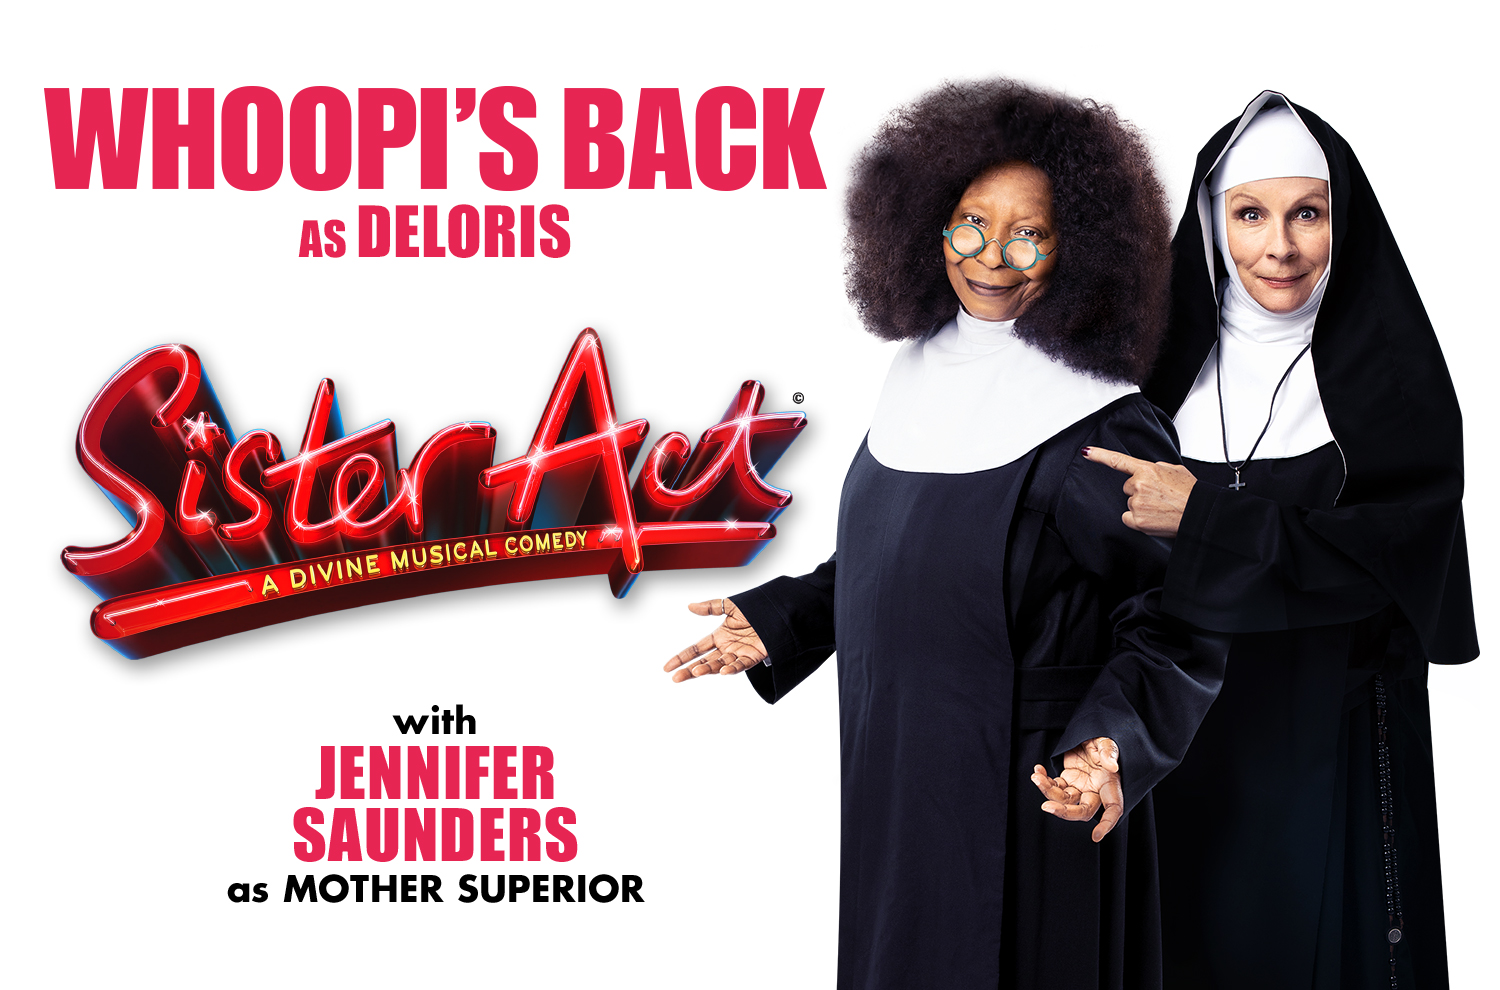 NEWS: Whoopi Goldberg & Jennifer Saunders to star in Sister Act in London in Summer 2020